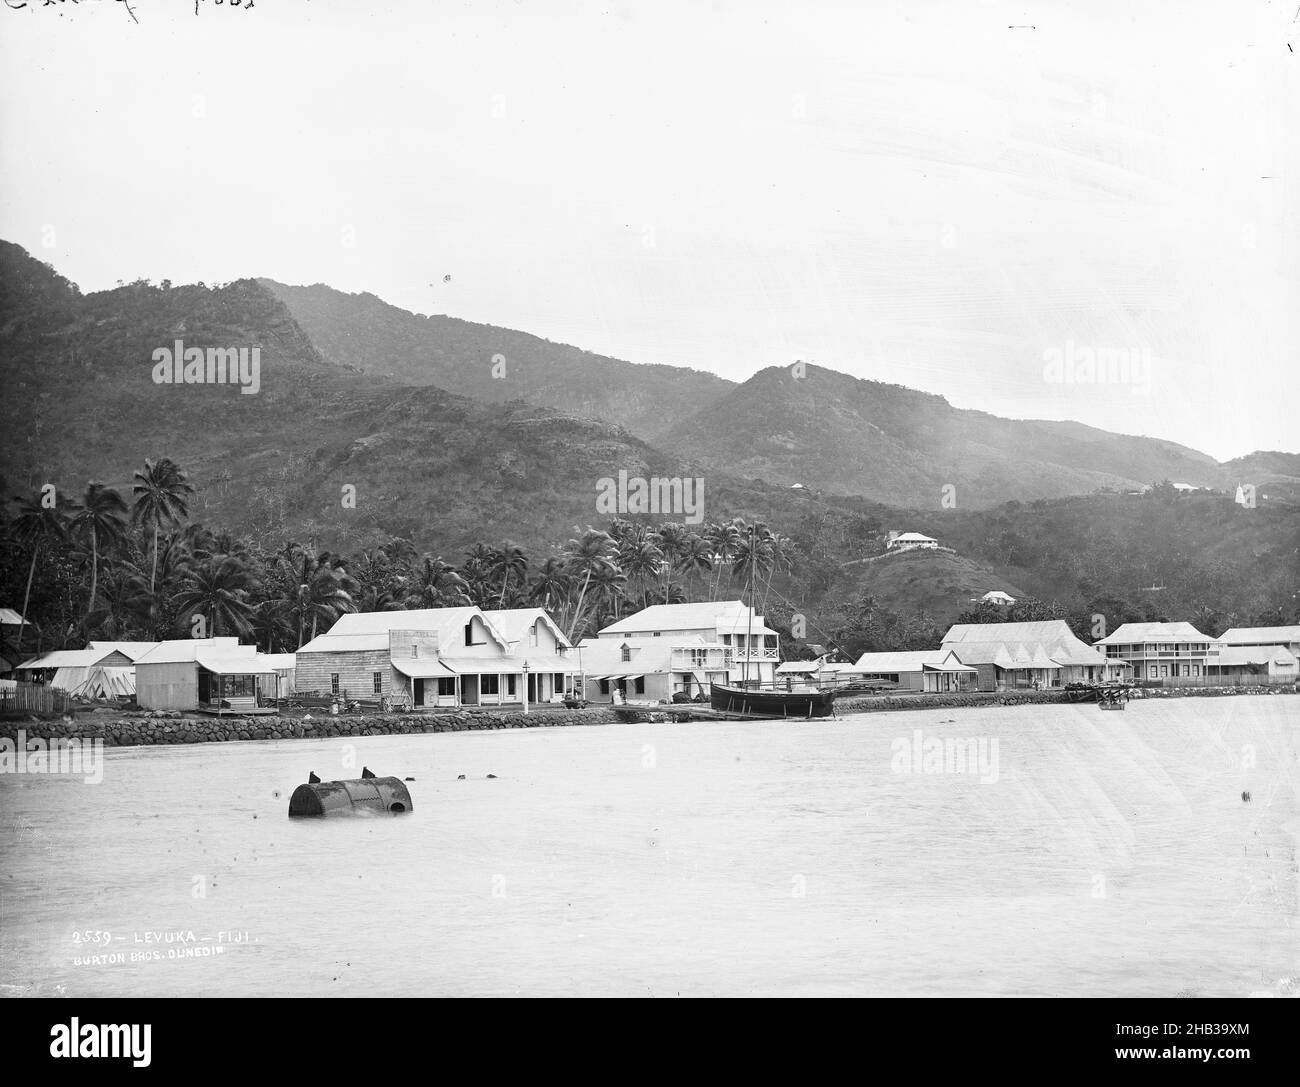 Levuka, Fiji, Burton Brothers studio, photography studio, 14 July 1884, New Zealand, gelatin dry plate process, Second plate in three plate panorama taken from the jetty. Foreground sea running to seawall with road above, buildings on roadside, coconut trees behind buildings (from centre to left) and steep hill rising behind buildings. To right a cylindrical buoy floats in the sea, a longboat is sitting on the shoreline. The hill line drops away left to right Stock Photo